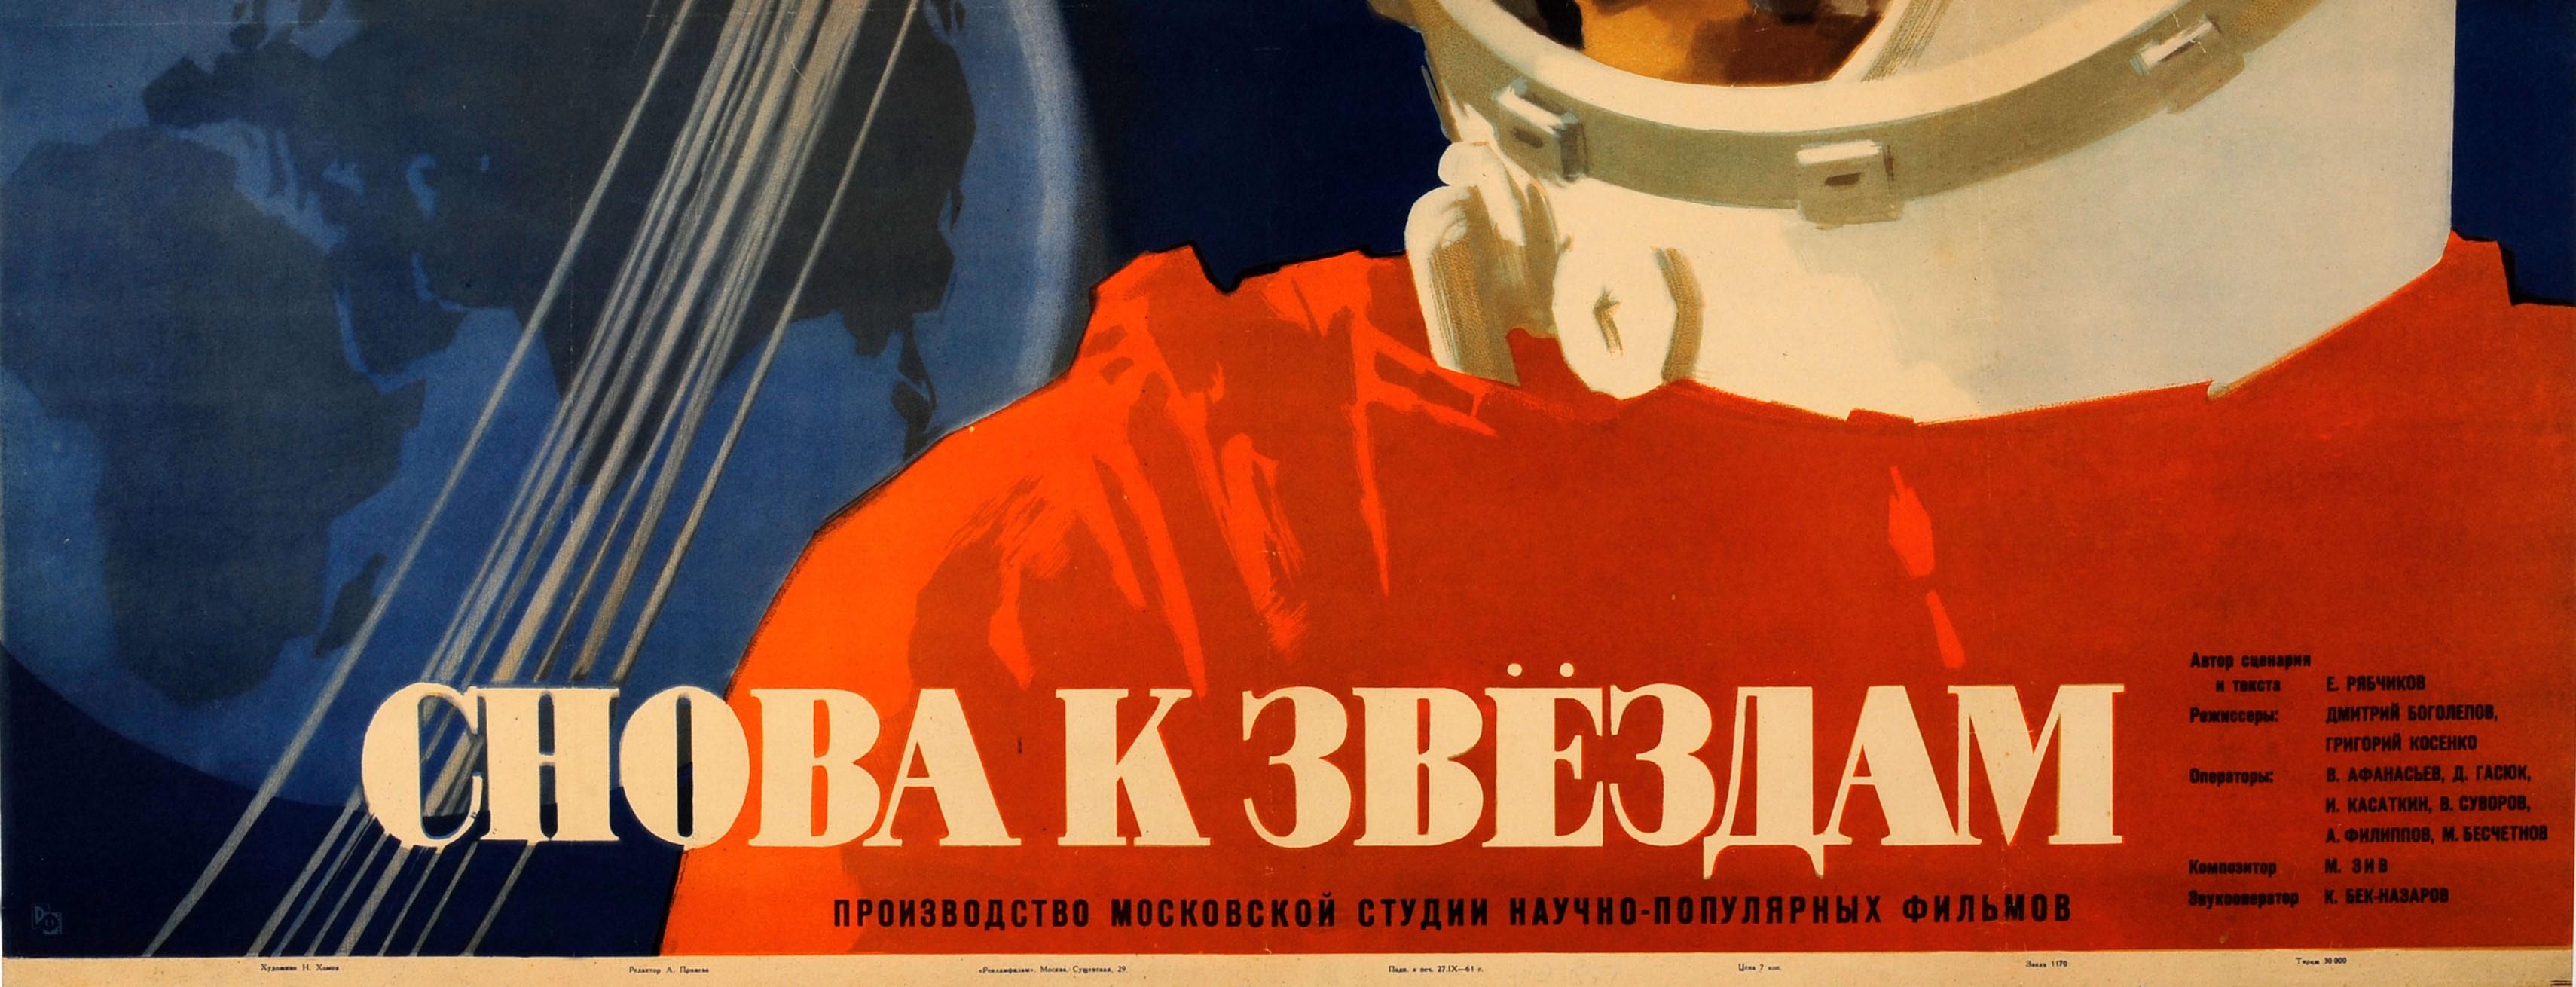 Original vintage Soviet movie poster for a space exploration documentary Back To The Stars featuring footage from space filmed by the Soviet cosmonaut German Titov from a Vostok 2 spacecraft. Great design featuring a cosmonaut in an orange and white